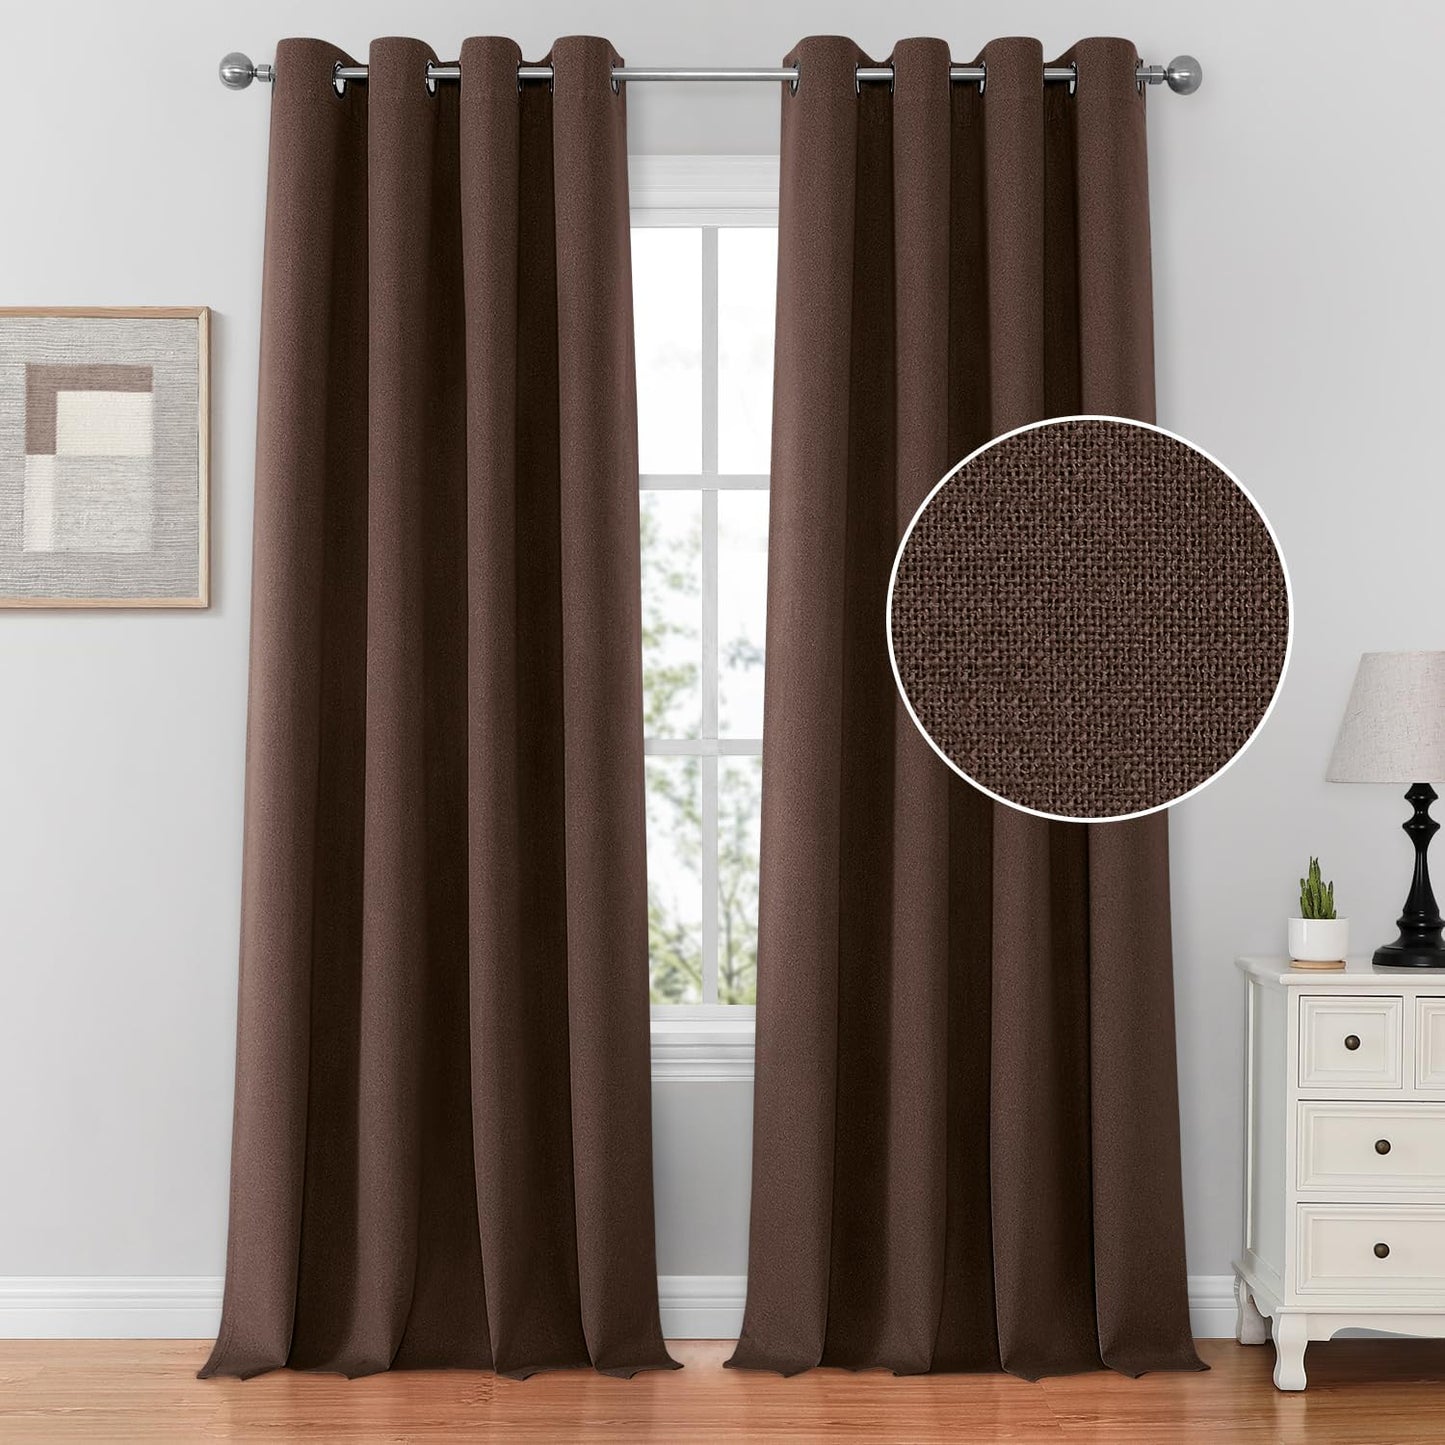 HOMEIDEAS 100% Blush Pink Linen Blackout Curtains for Bedroom, 52 X 84 Inch Room Darkening Curtains for Living, Faux Linen Thermal Insulated Full Black Out Grommet Window Curtains/Drapes  HOMEIDEAS Chocolate/Brown W52" X L84" 